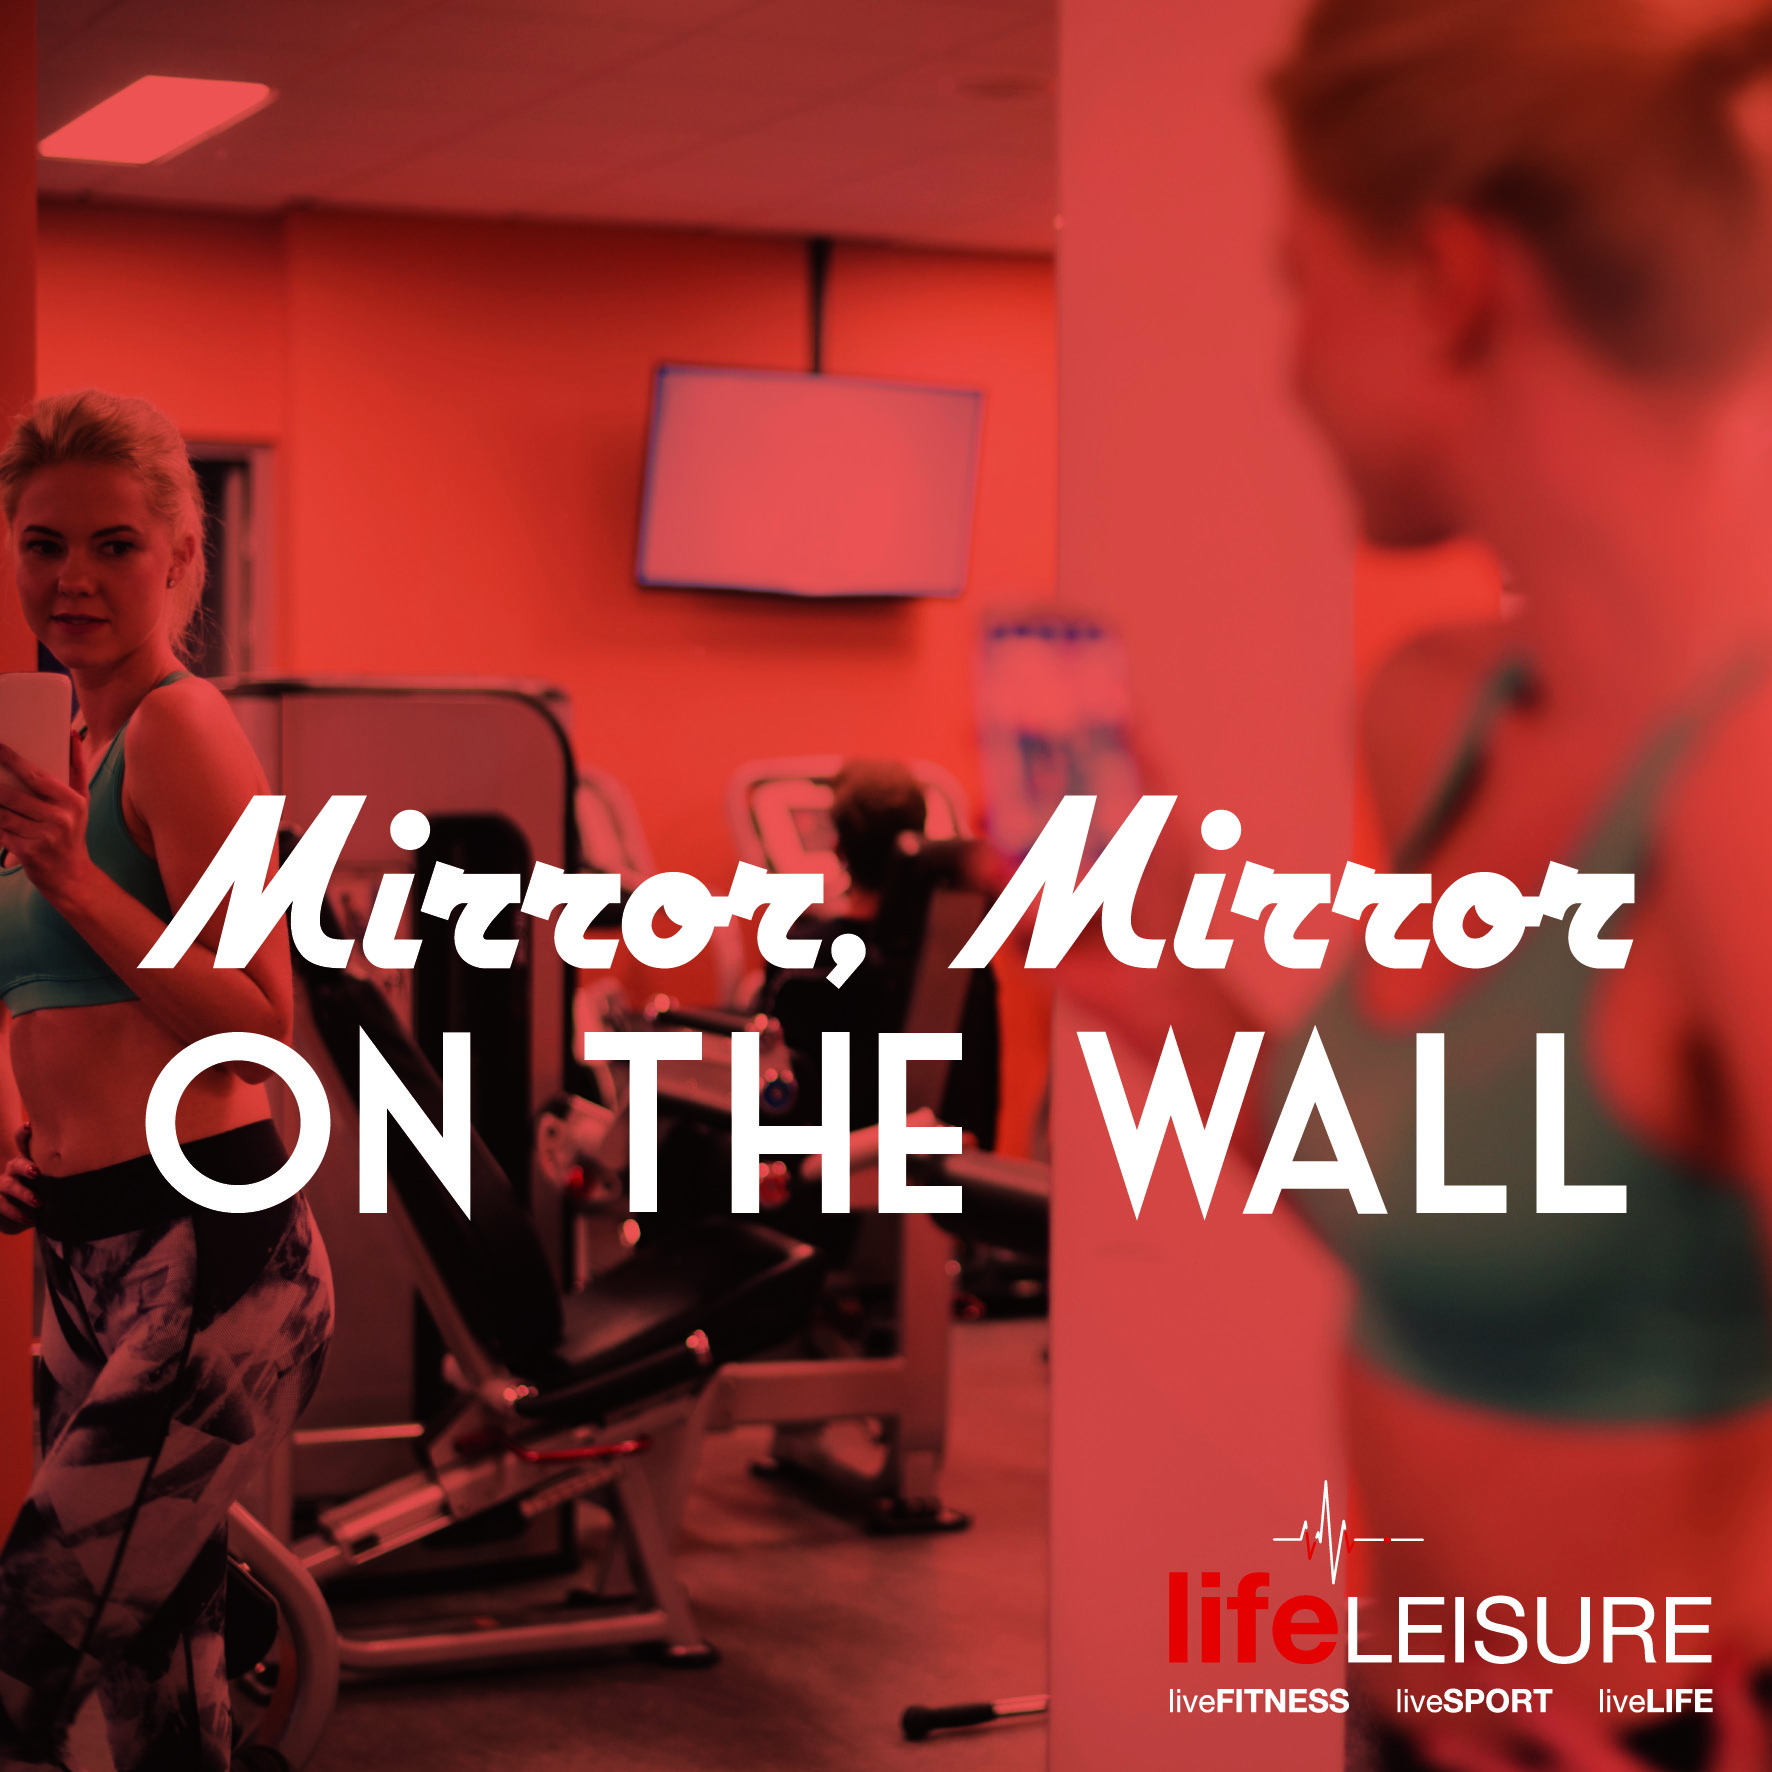 Gym Etiquette, Mirror mirror on the wall